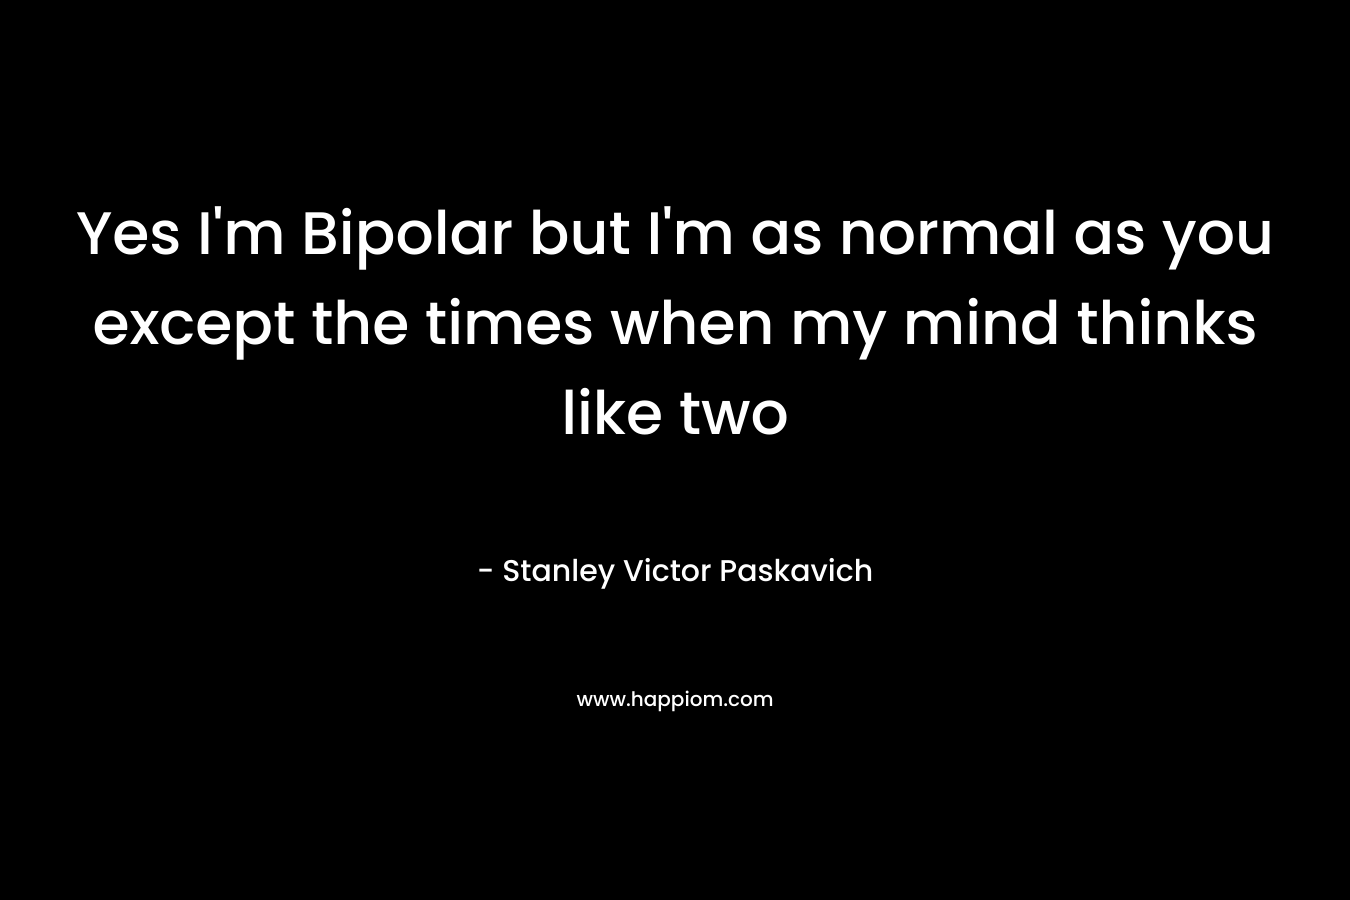 Yes I’m Bipolar but I’m as normal as you except the times when my mind thinks like two – Stanley Victor Paskavich